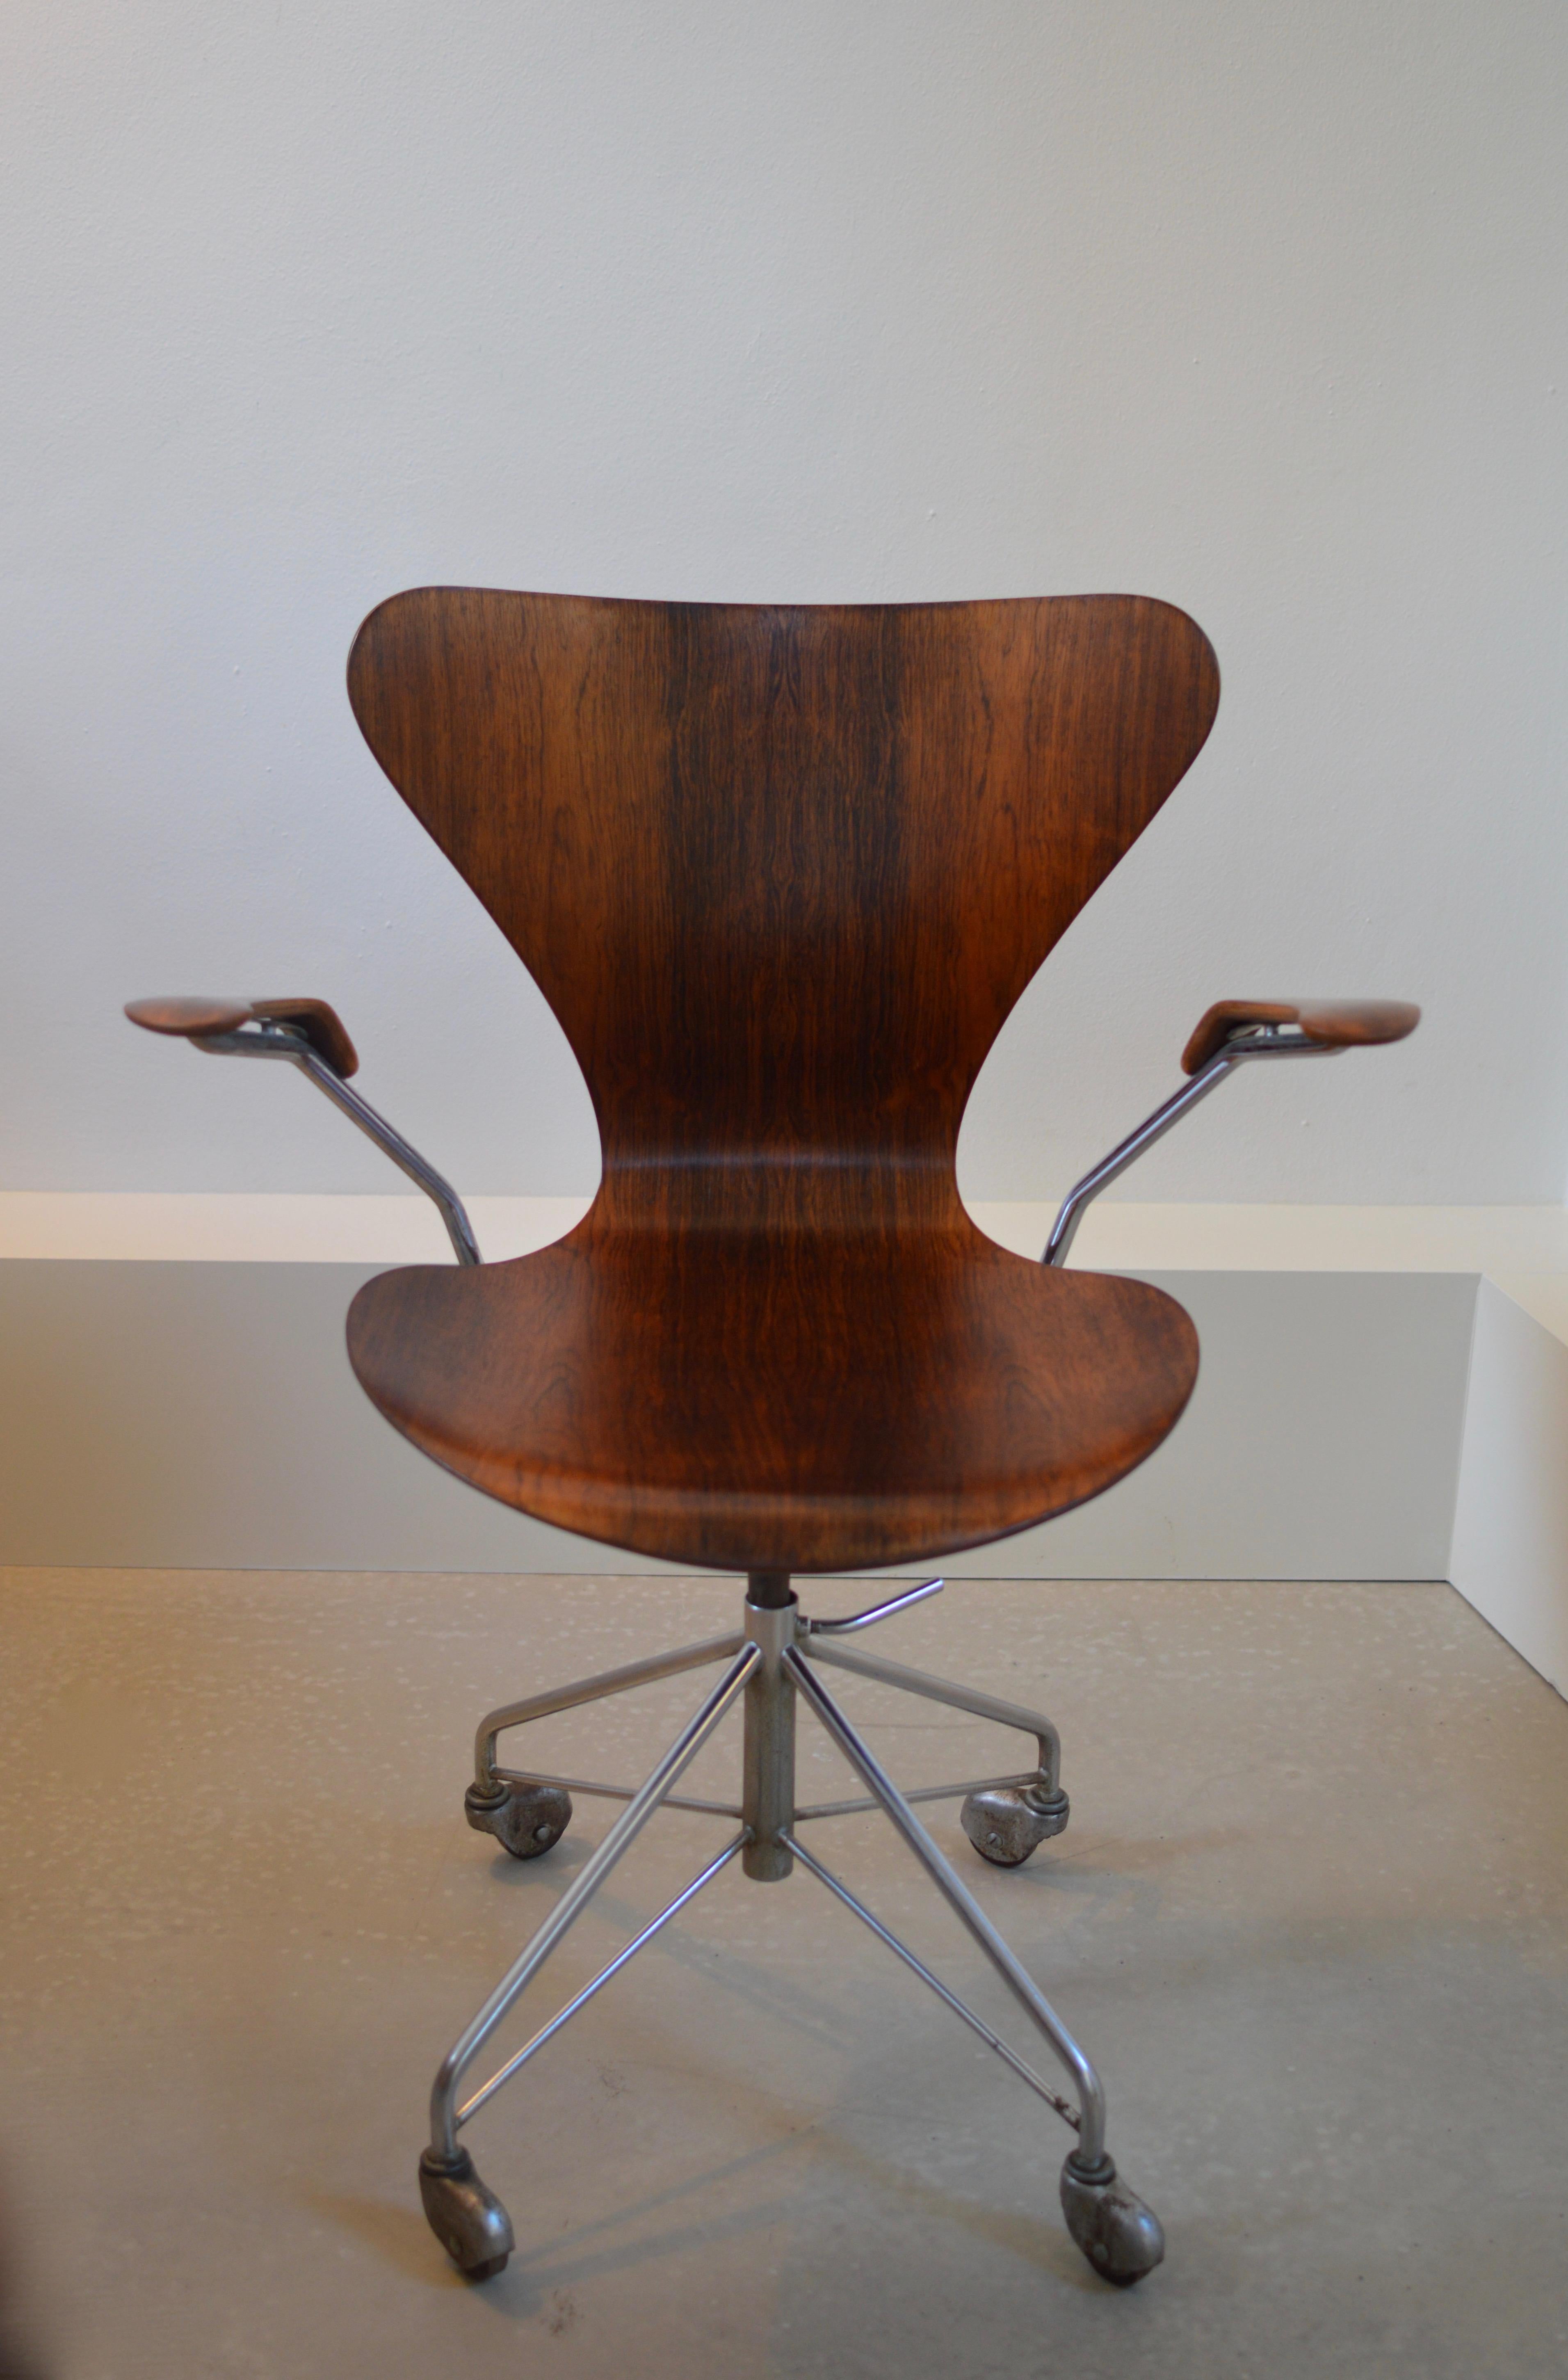 Rare First Production Series Rosewood Arne Jacobsen Desk Chair 3